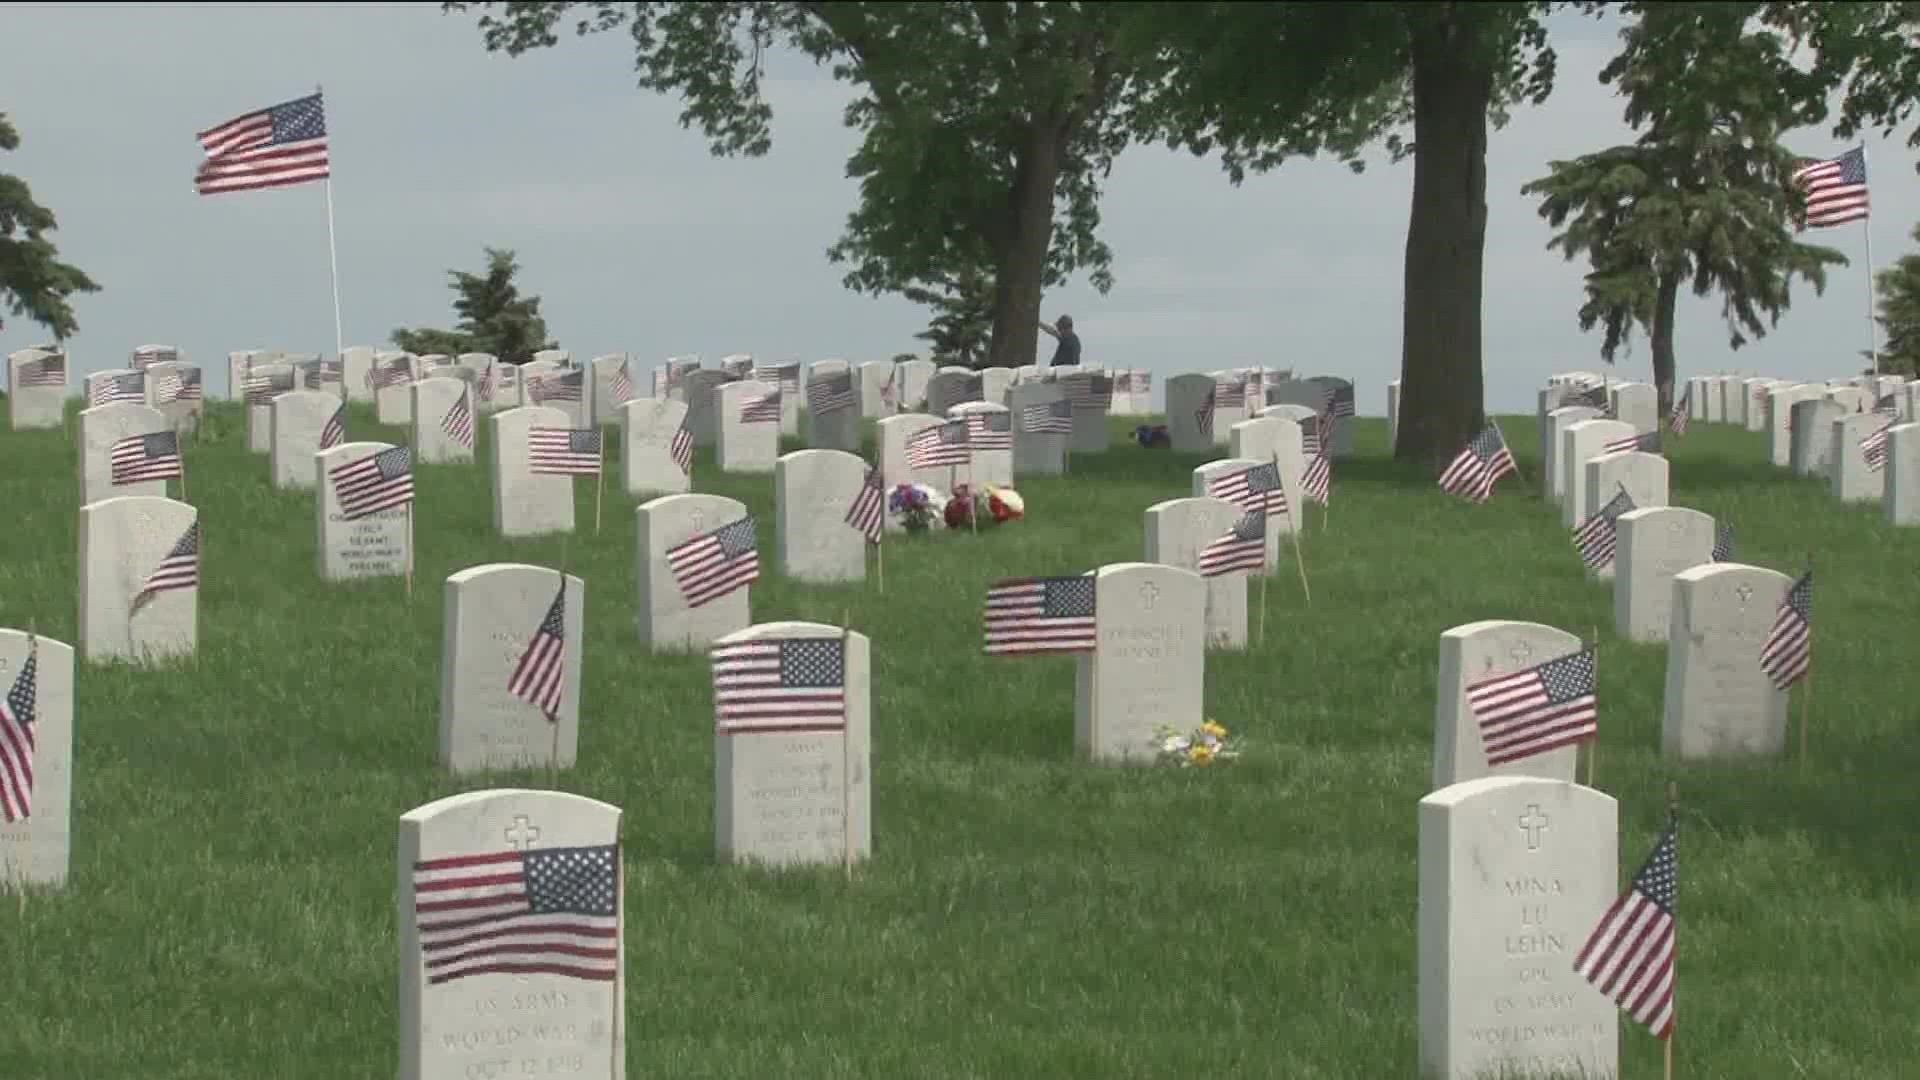 Nearly 200,000 flags planted at Fort Snelling National Cemetery for